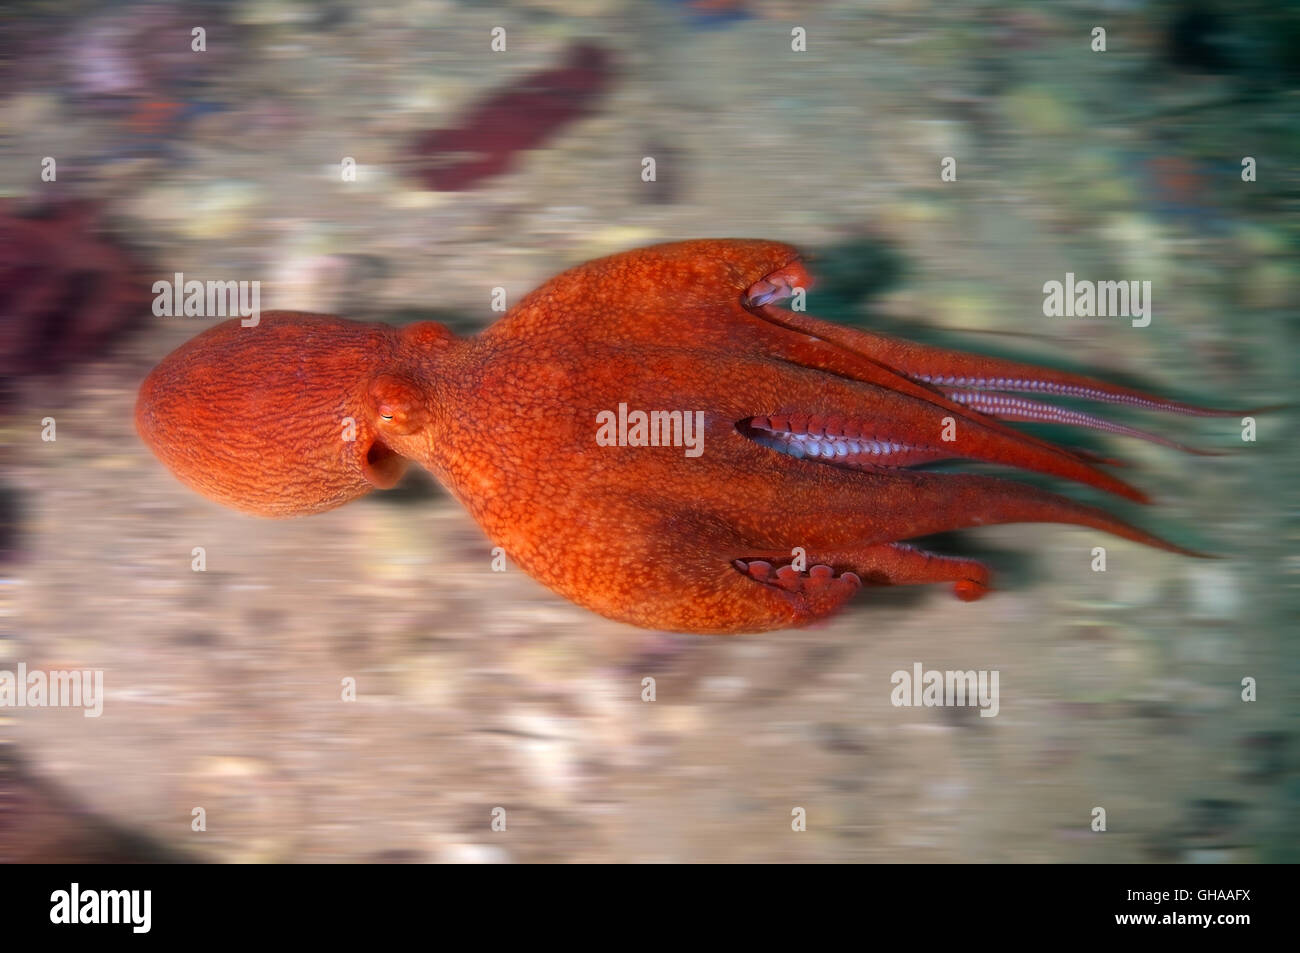 Giant Pacific octopus or North Pacific giant octopus (Enteroctopus dofleini) dynamically floats above the bottom, North Pacific  Stock Photo